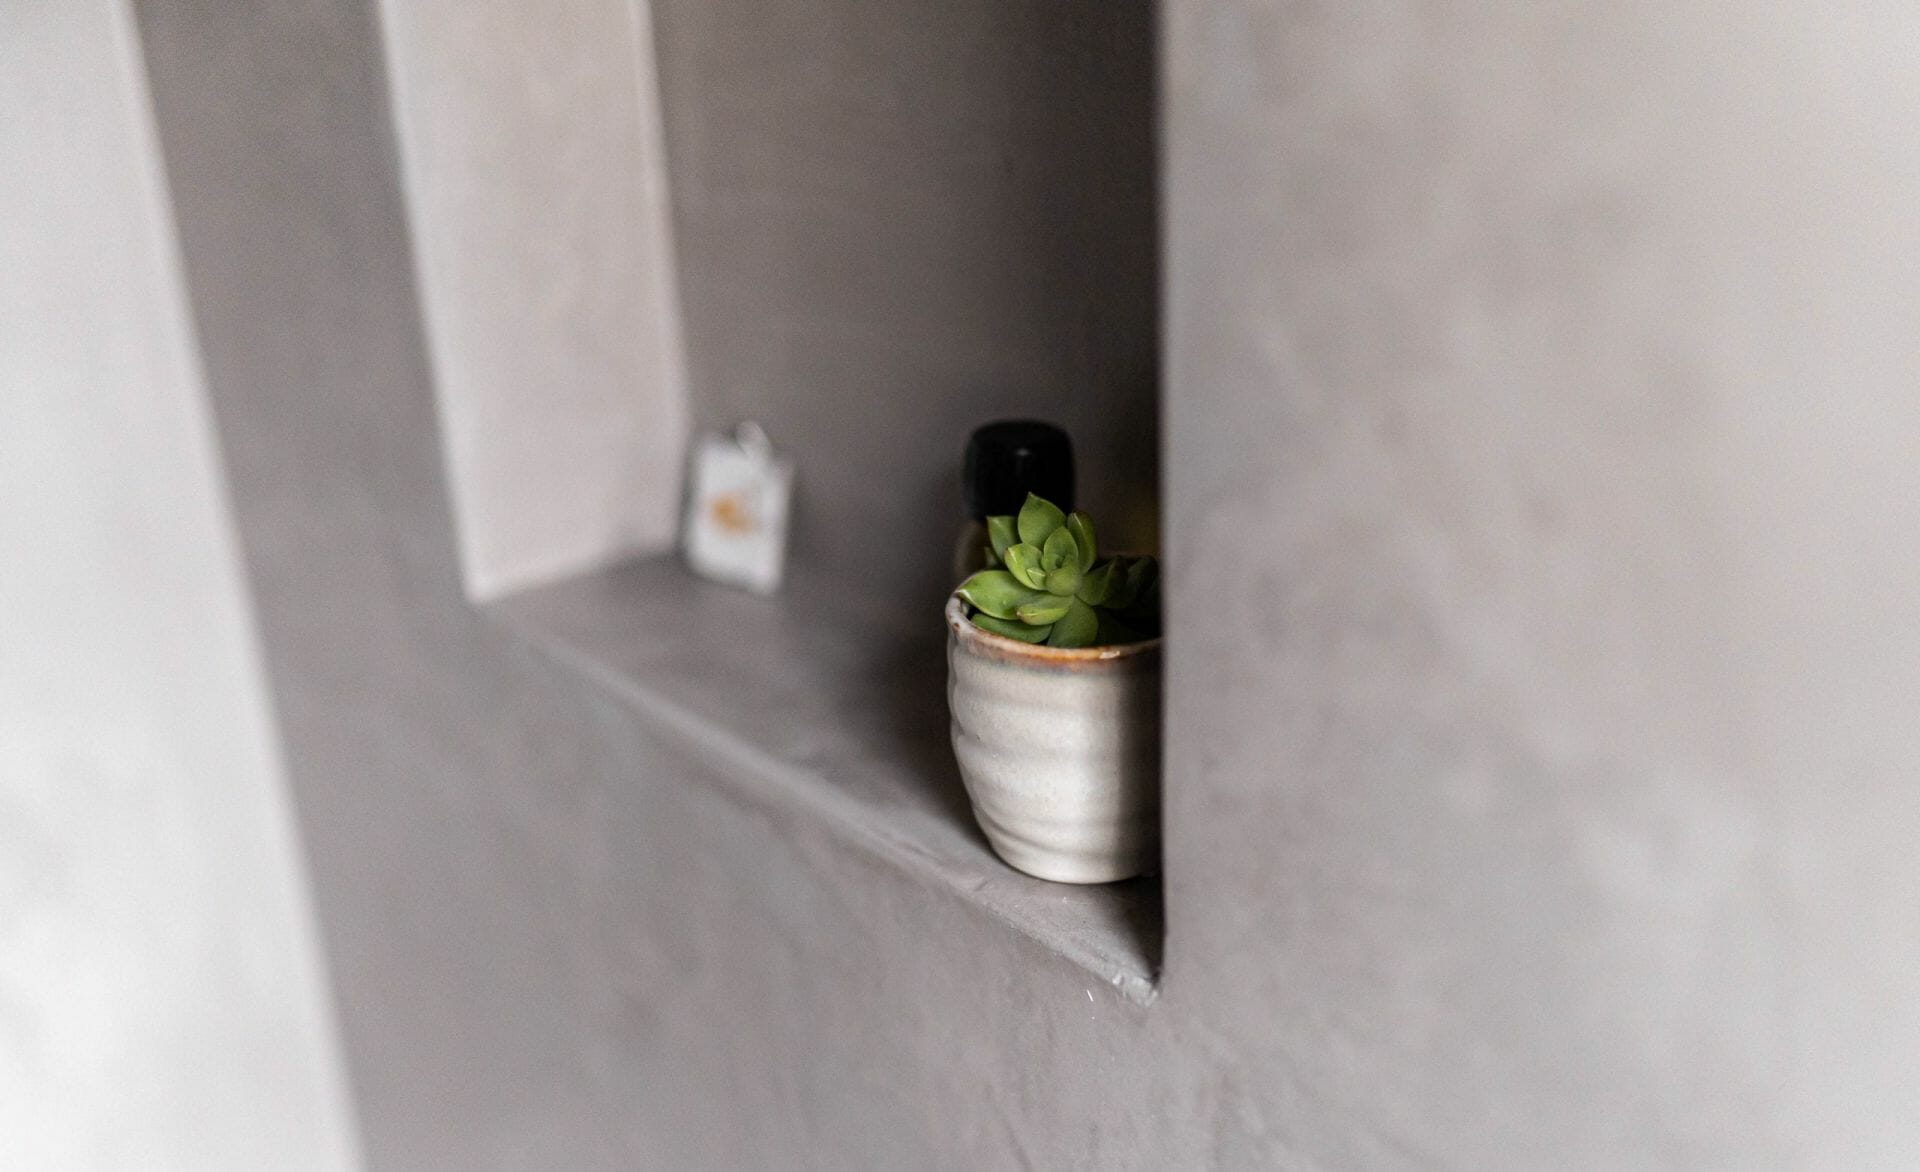 Microtopping on shelf in a bathroom space